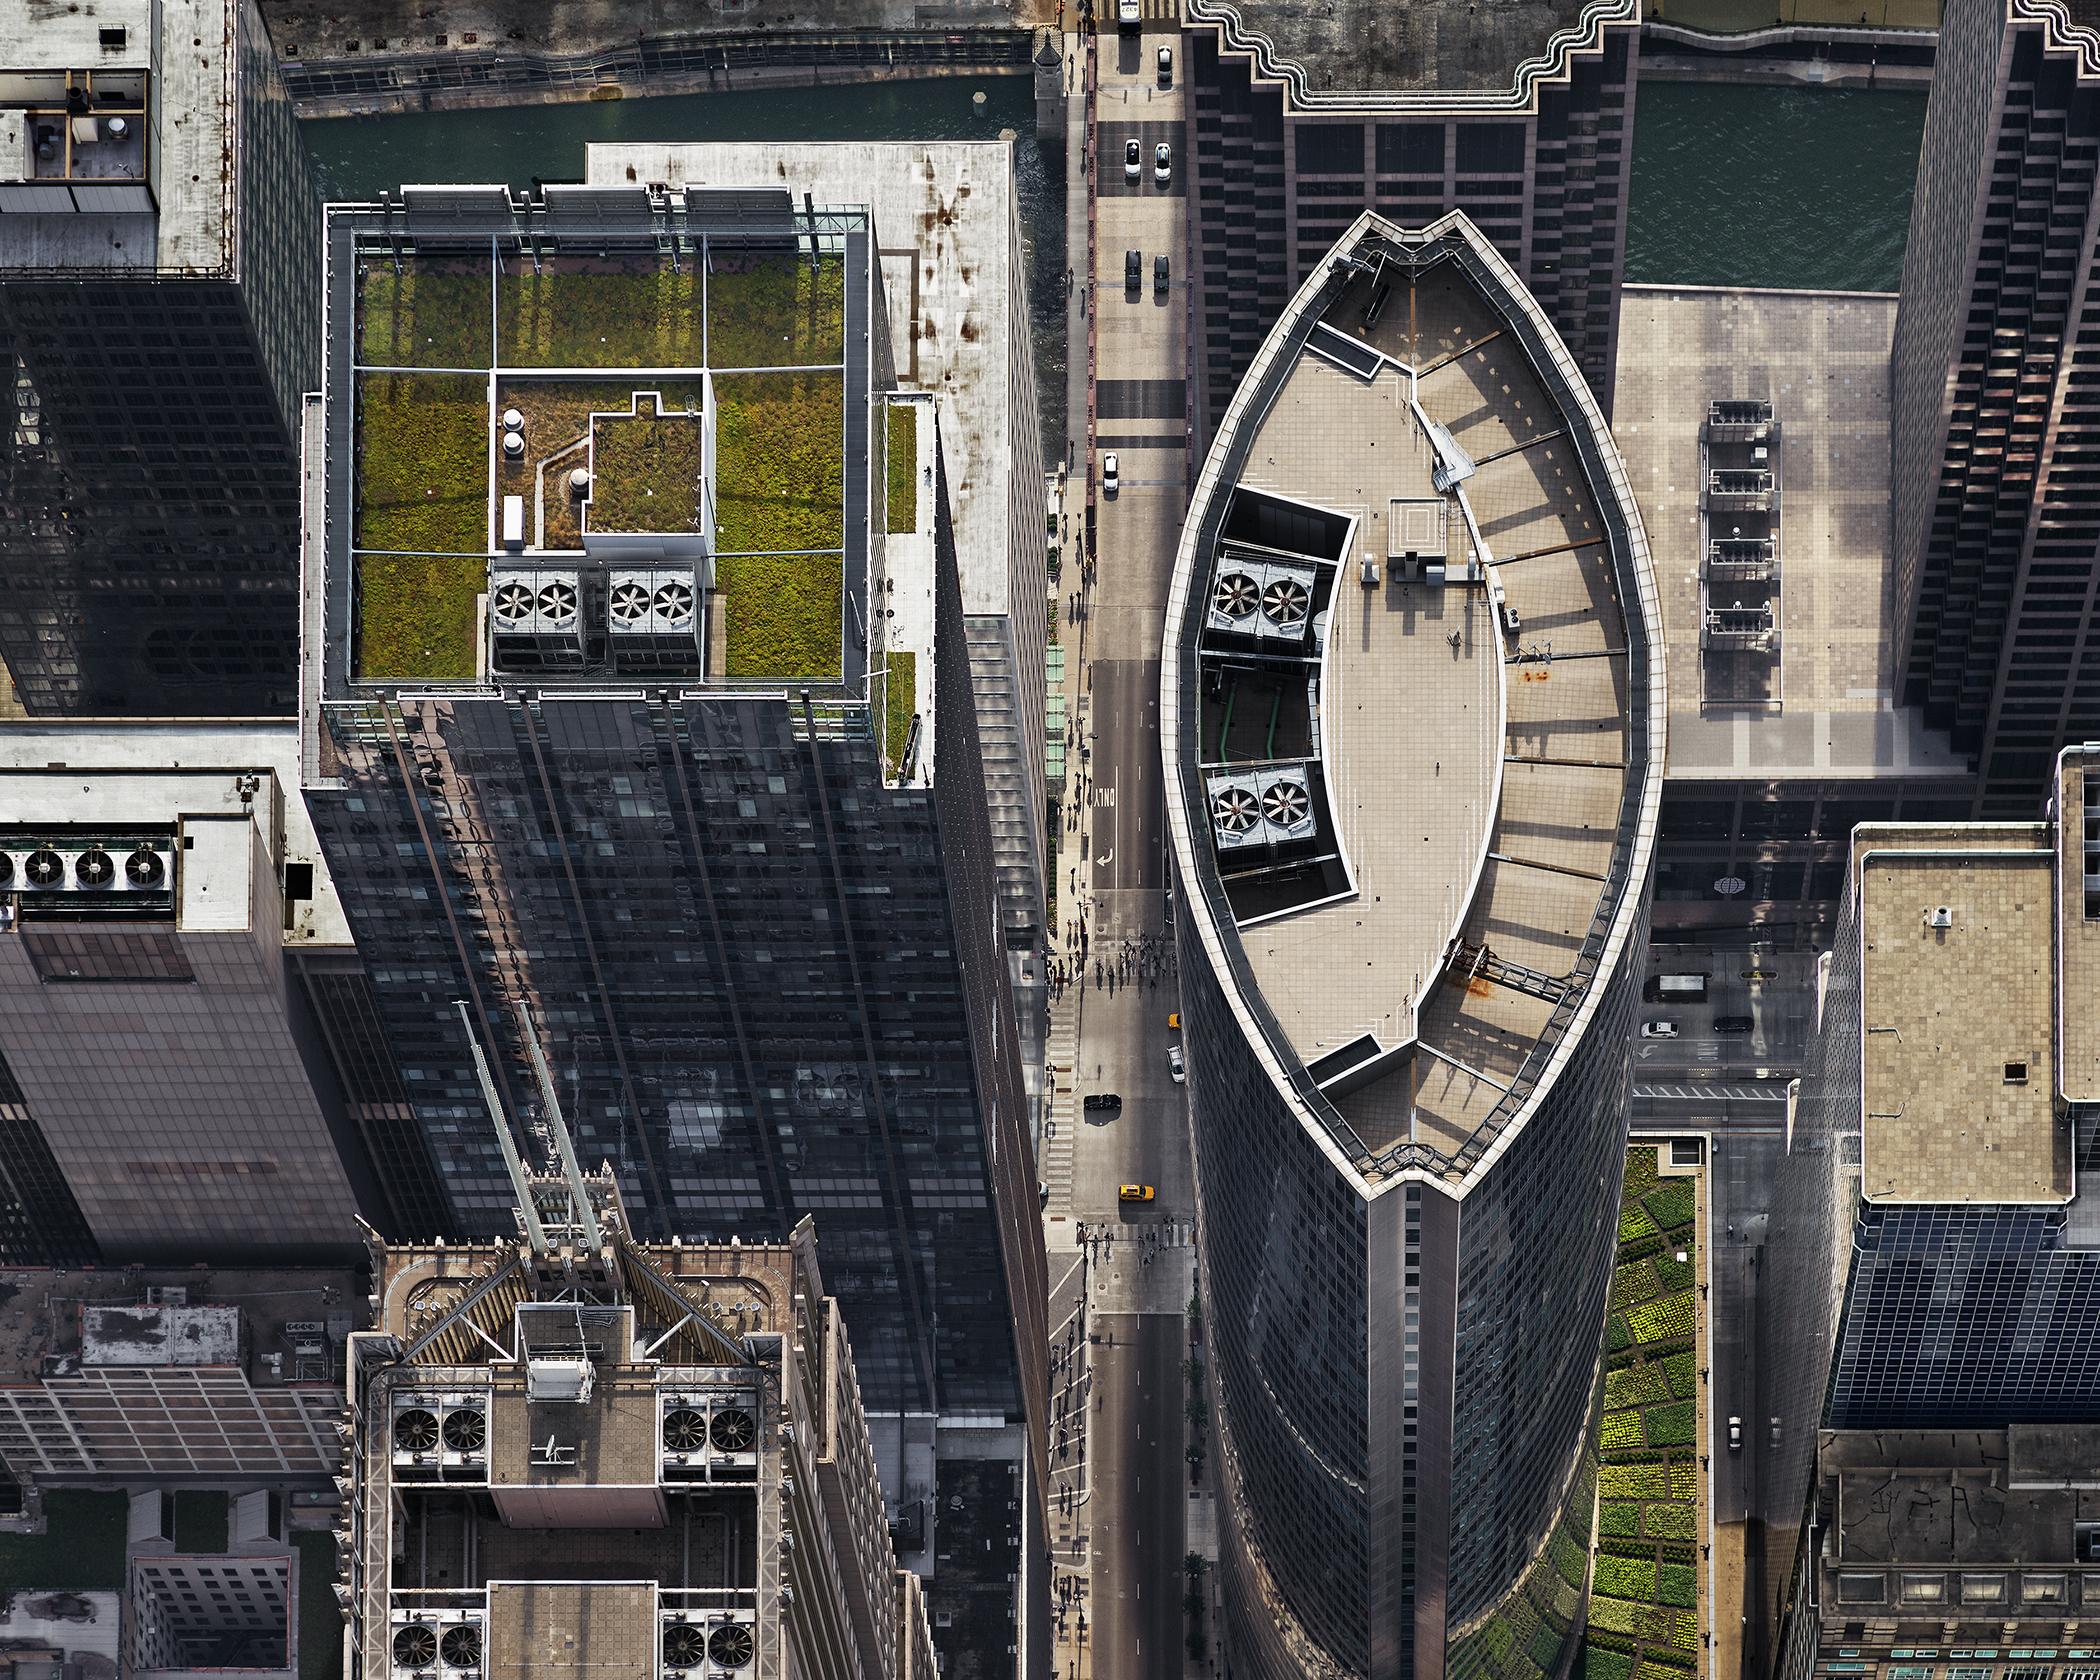 111 South Wacker Drive (from above, looking West). Chicago, IL, July 2013. From the series Rooftop.